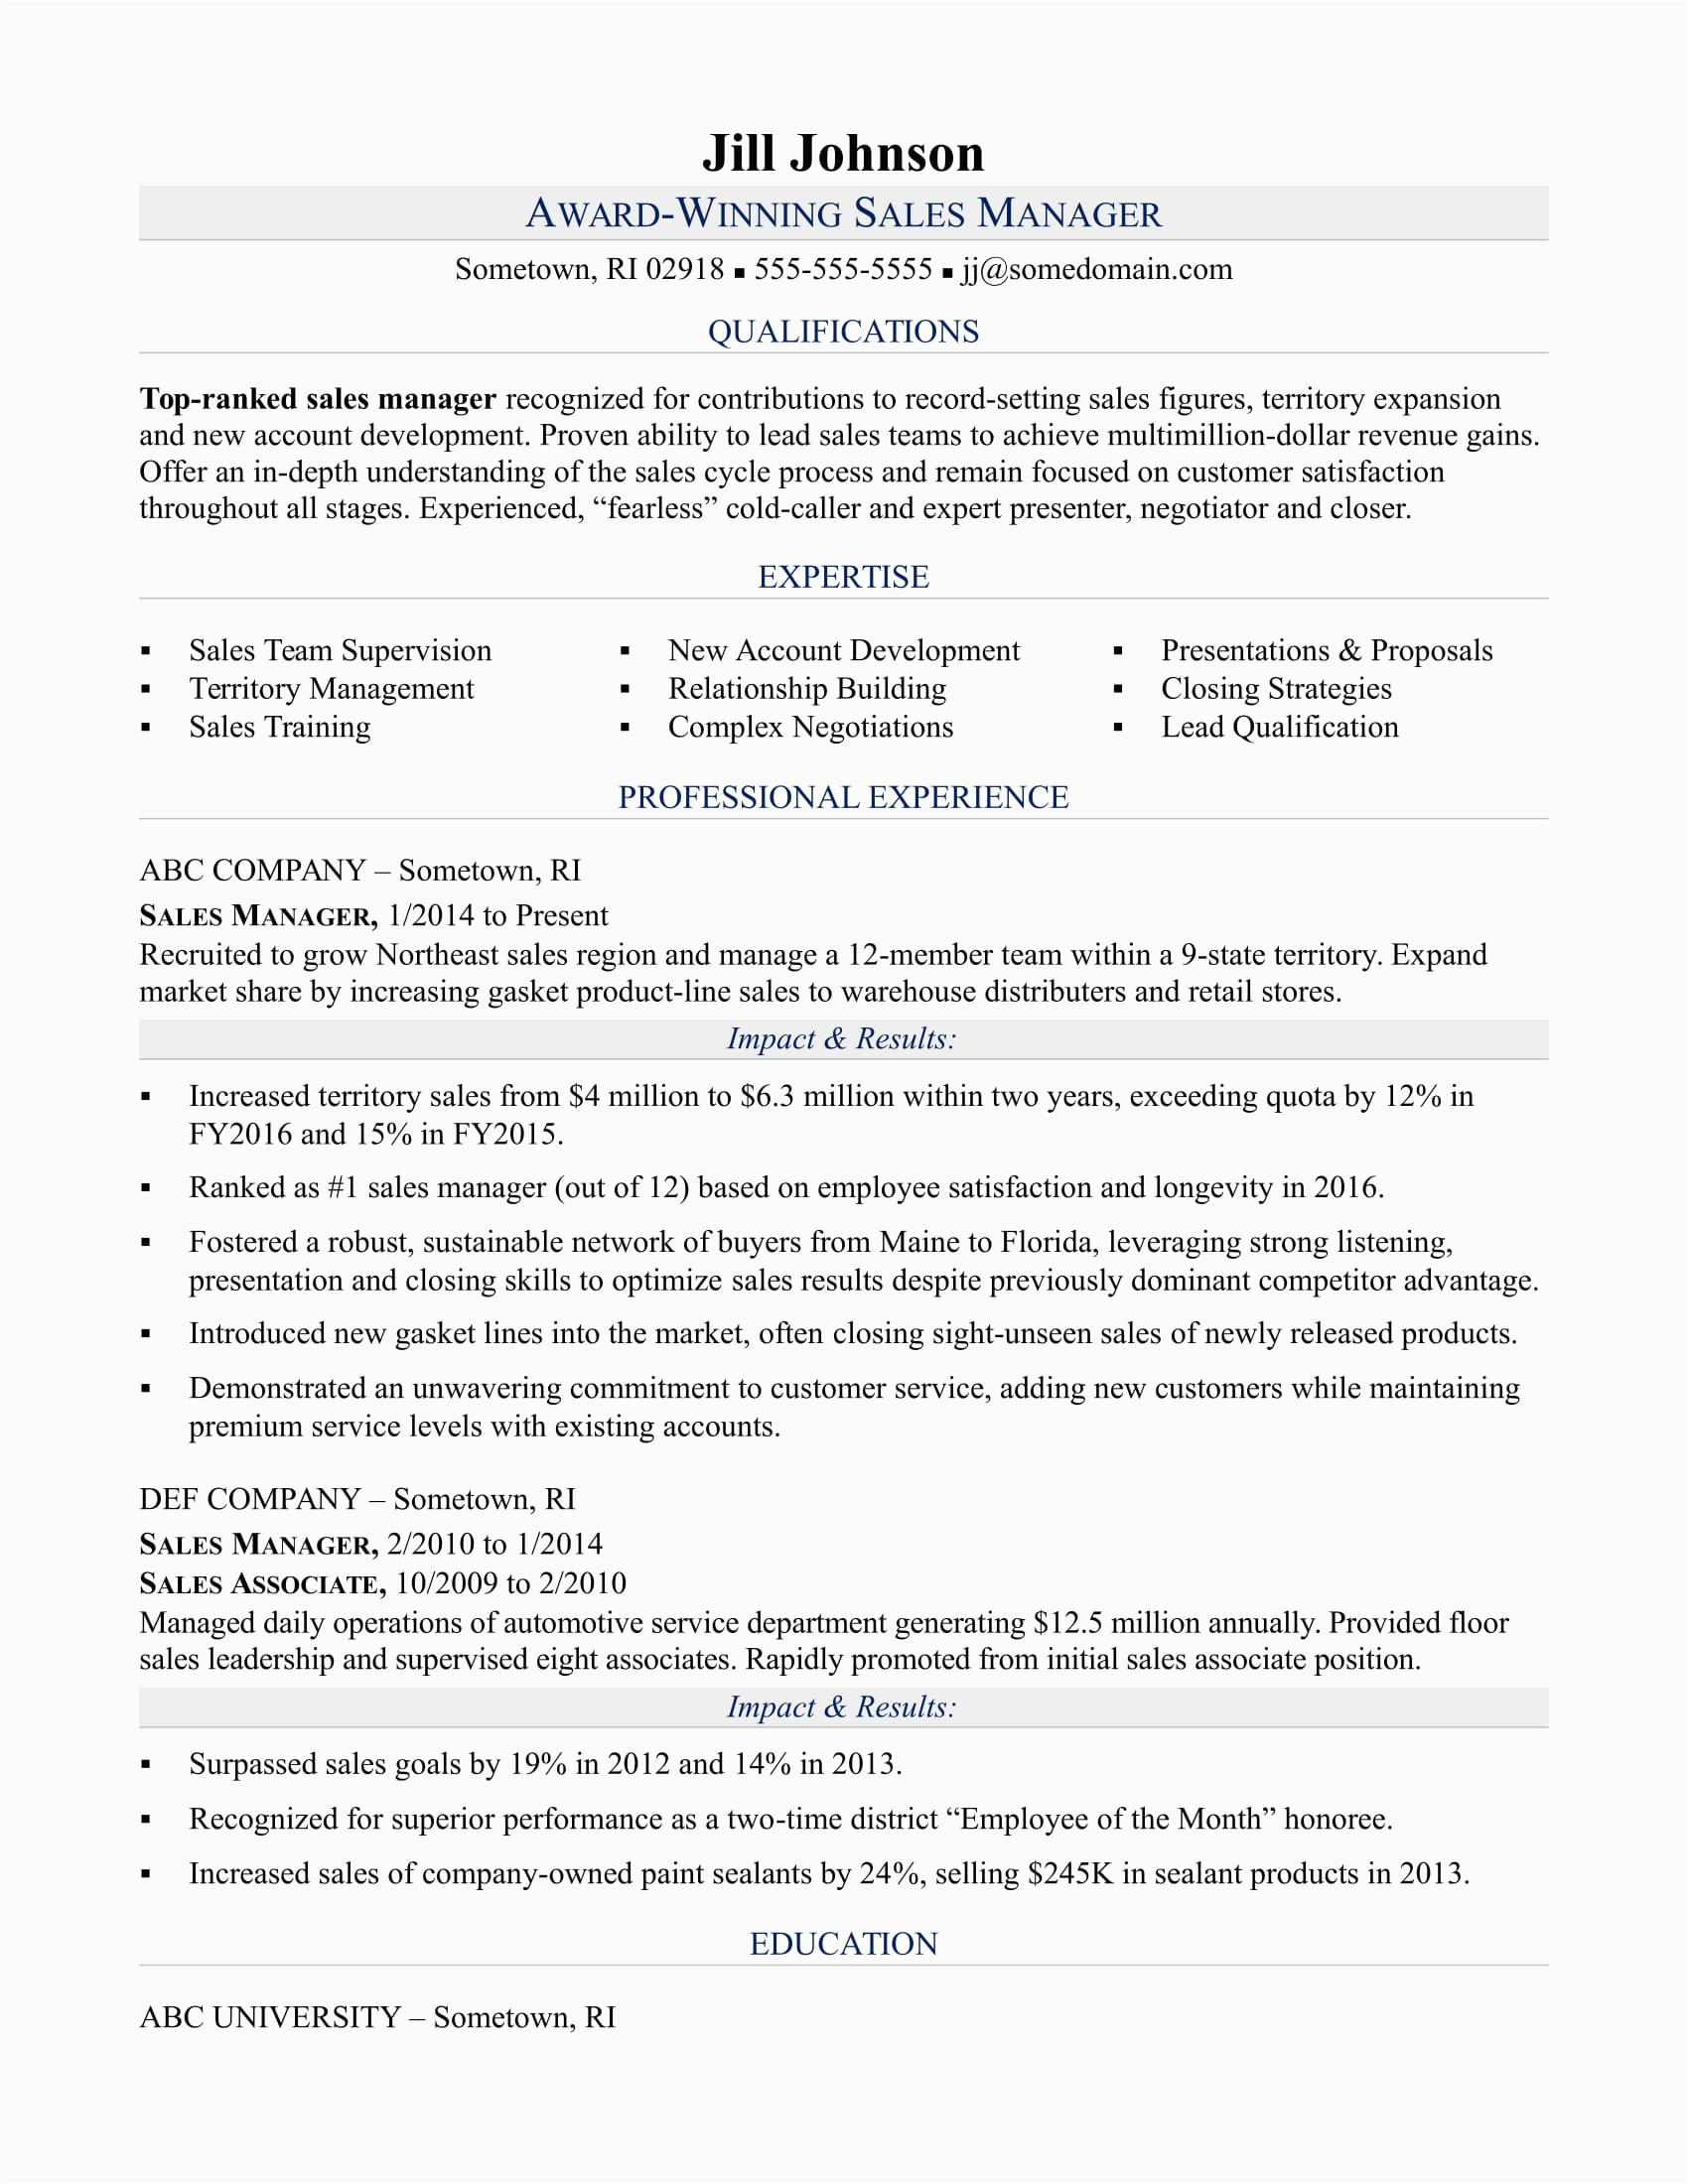 Sample Resume for Sales Lady In Department Store Sales Manager Car Dealership Resume Resume Templates